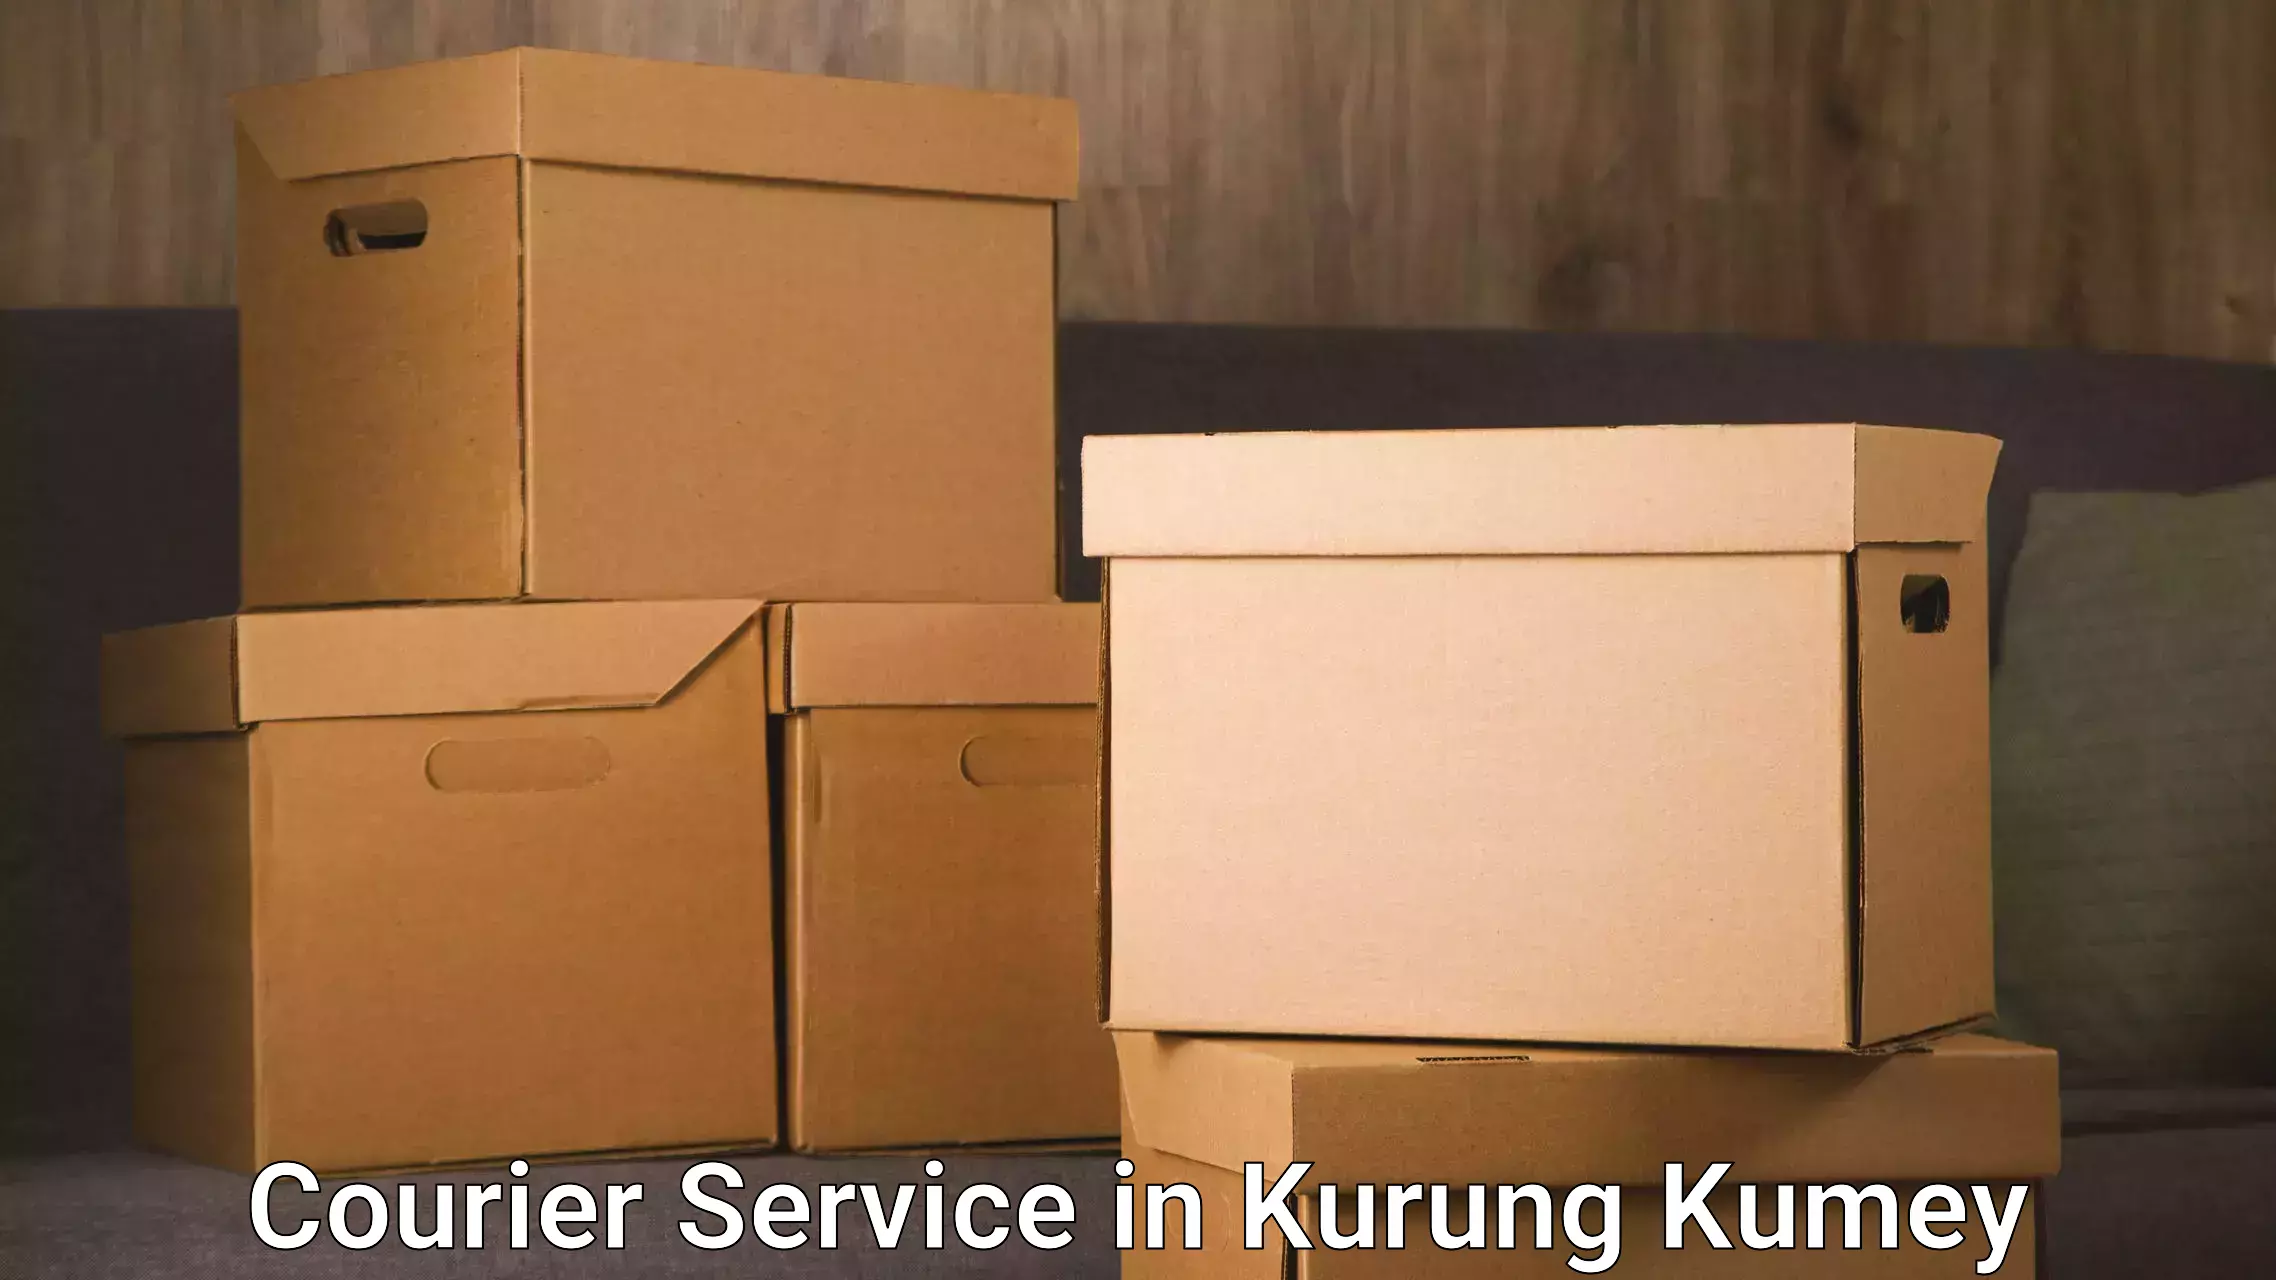 Round-the-clock parcel delivery in Kurung Kumey